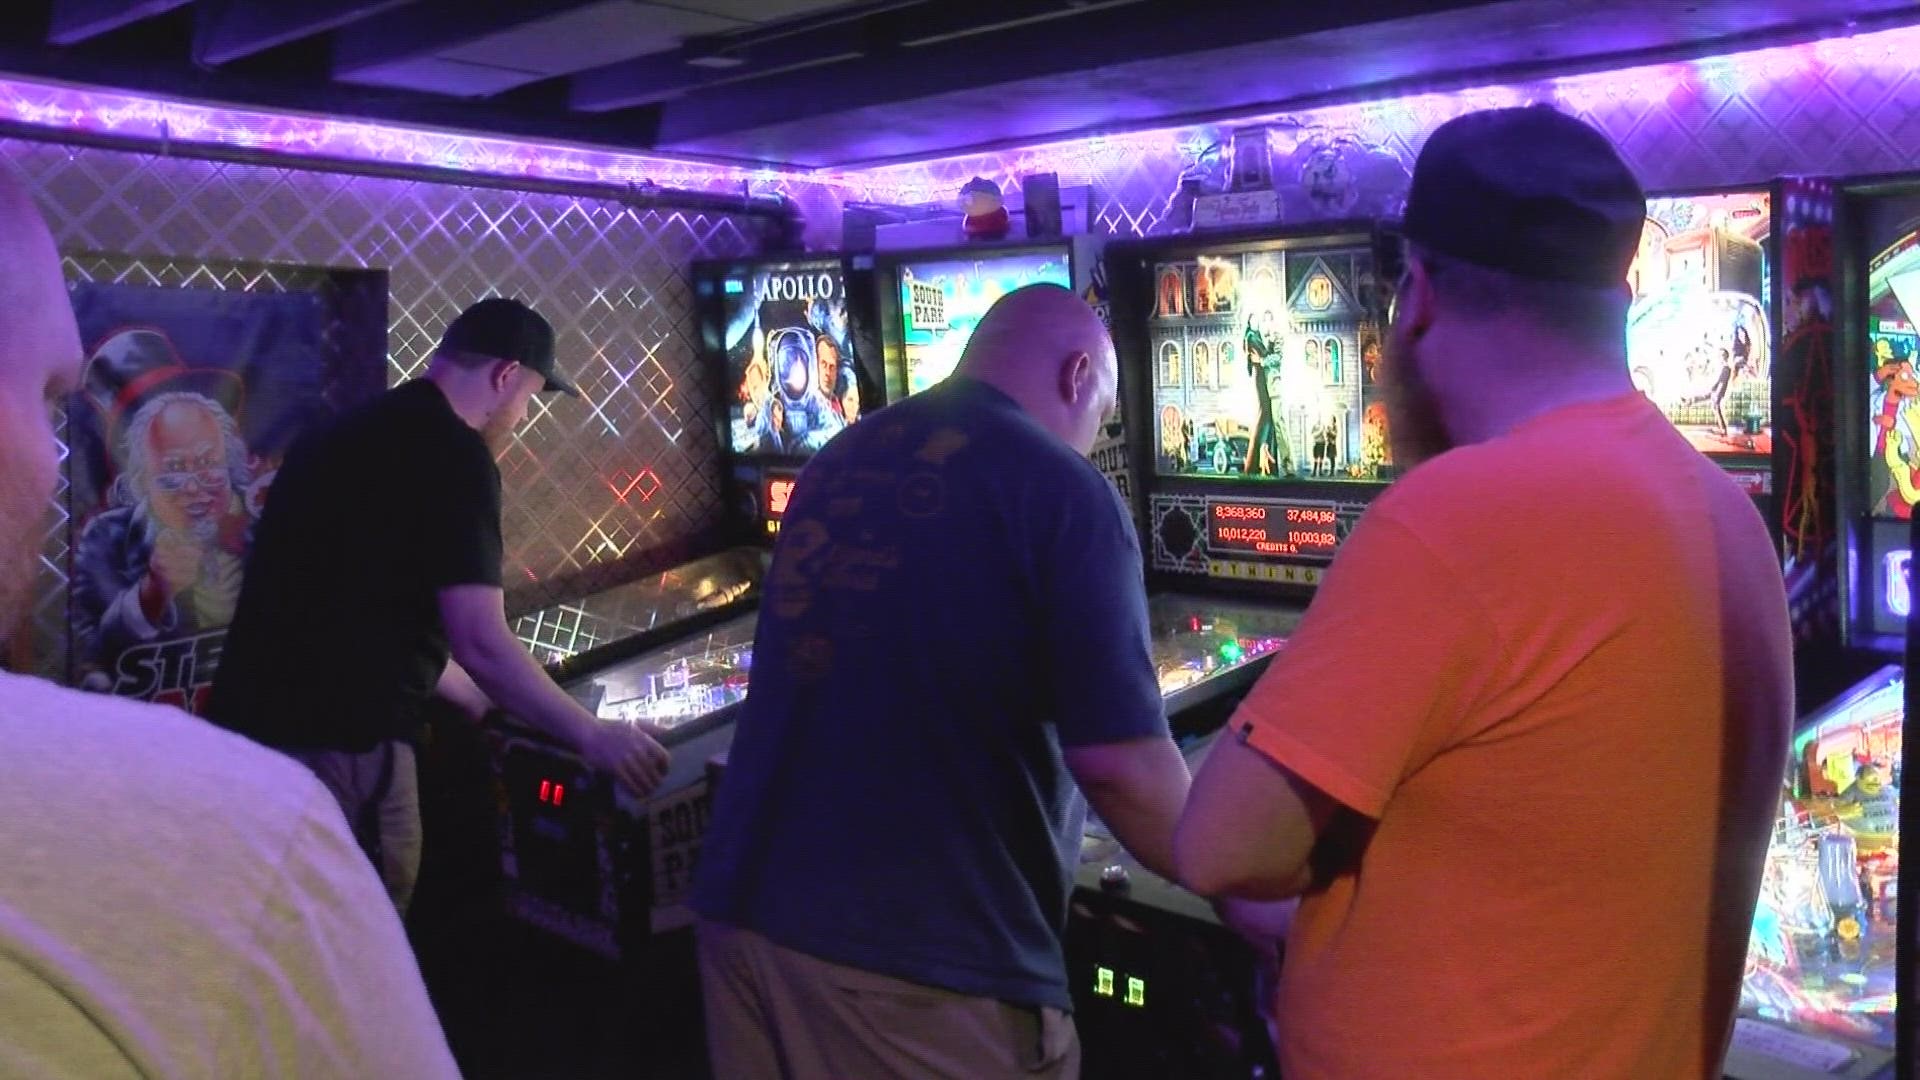 HEAVY Beer Company, on N. Summit St. in north Toledo, held a pinball tournament on Sunday evening. Players of all skill levels came to share their love of pinball.